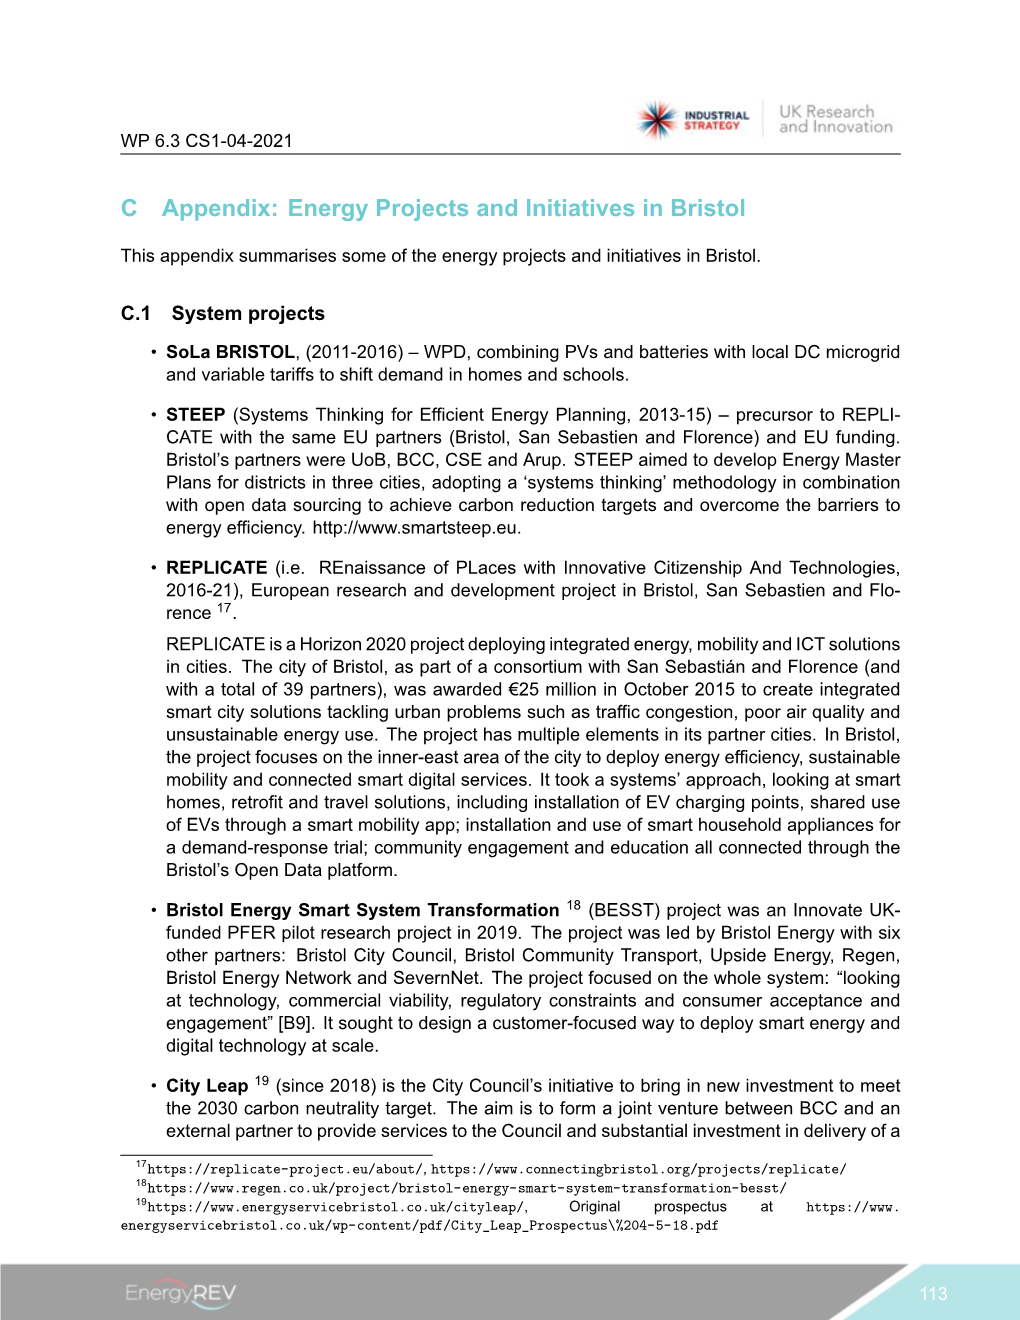 Energy Projects and Initiatives in Bristol